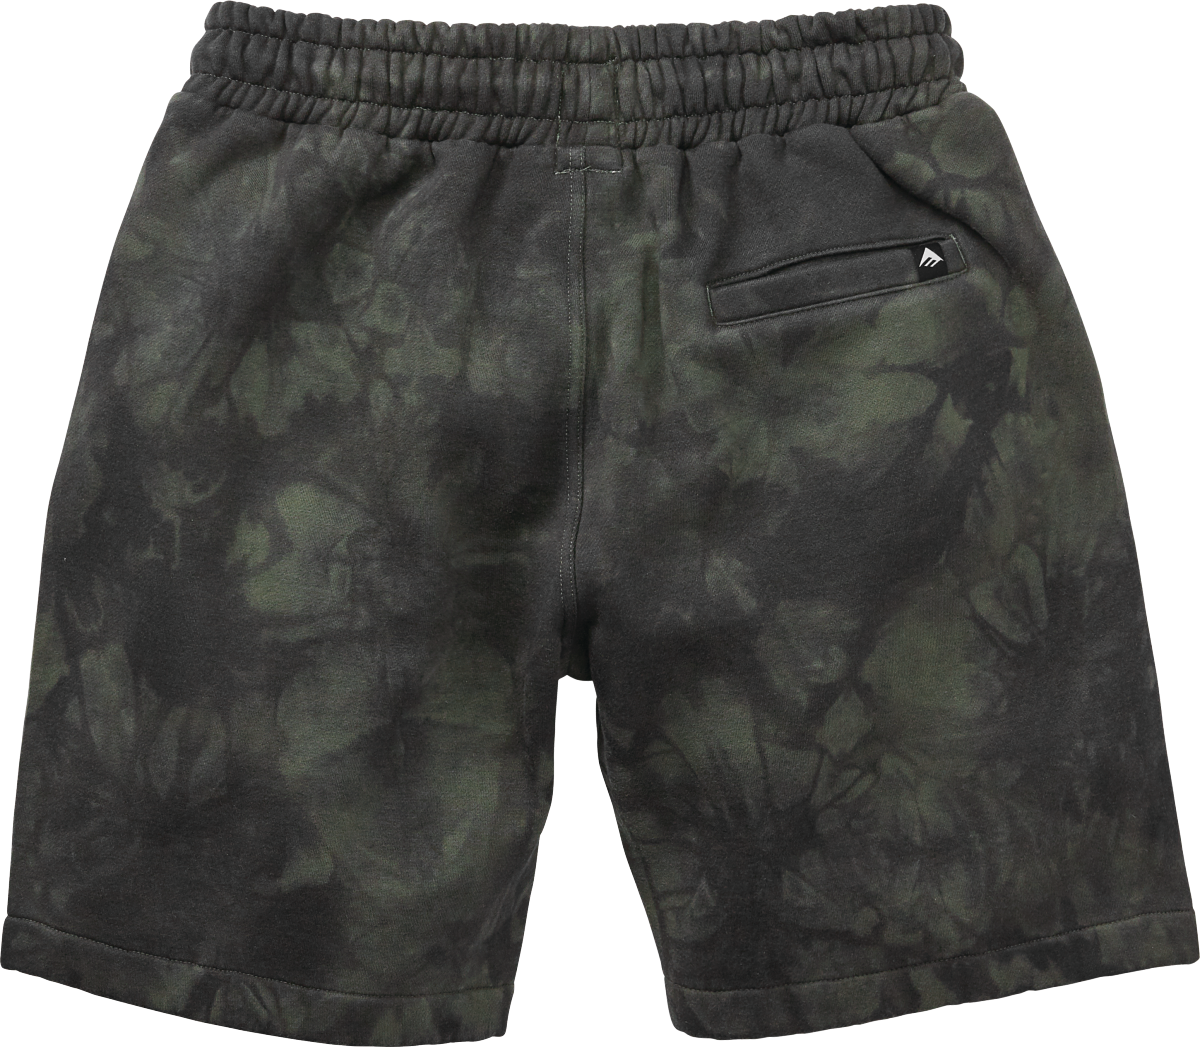 A Pair Of Shorts With A Tie Dye Pattern